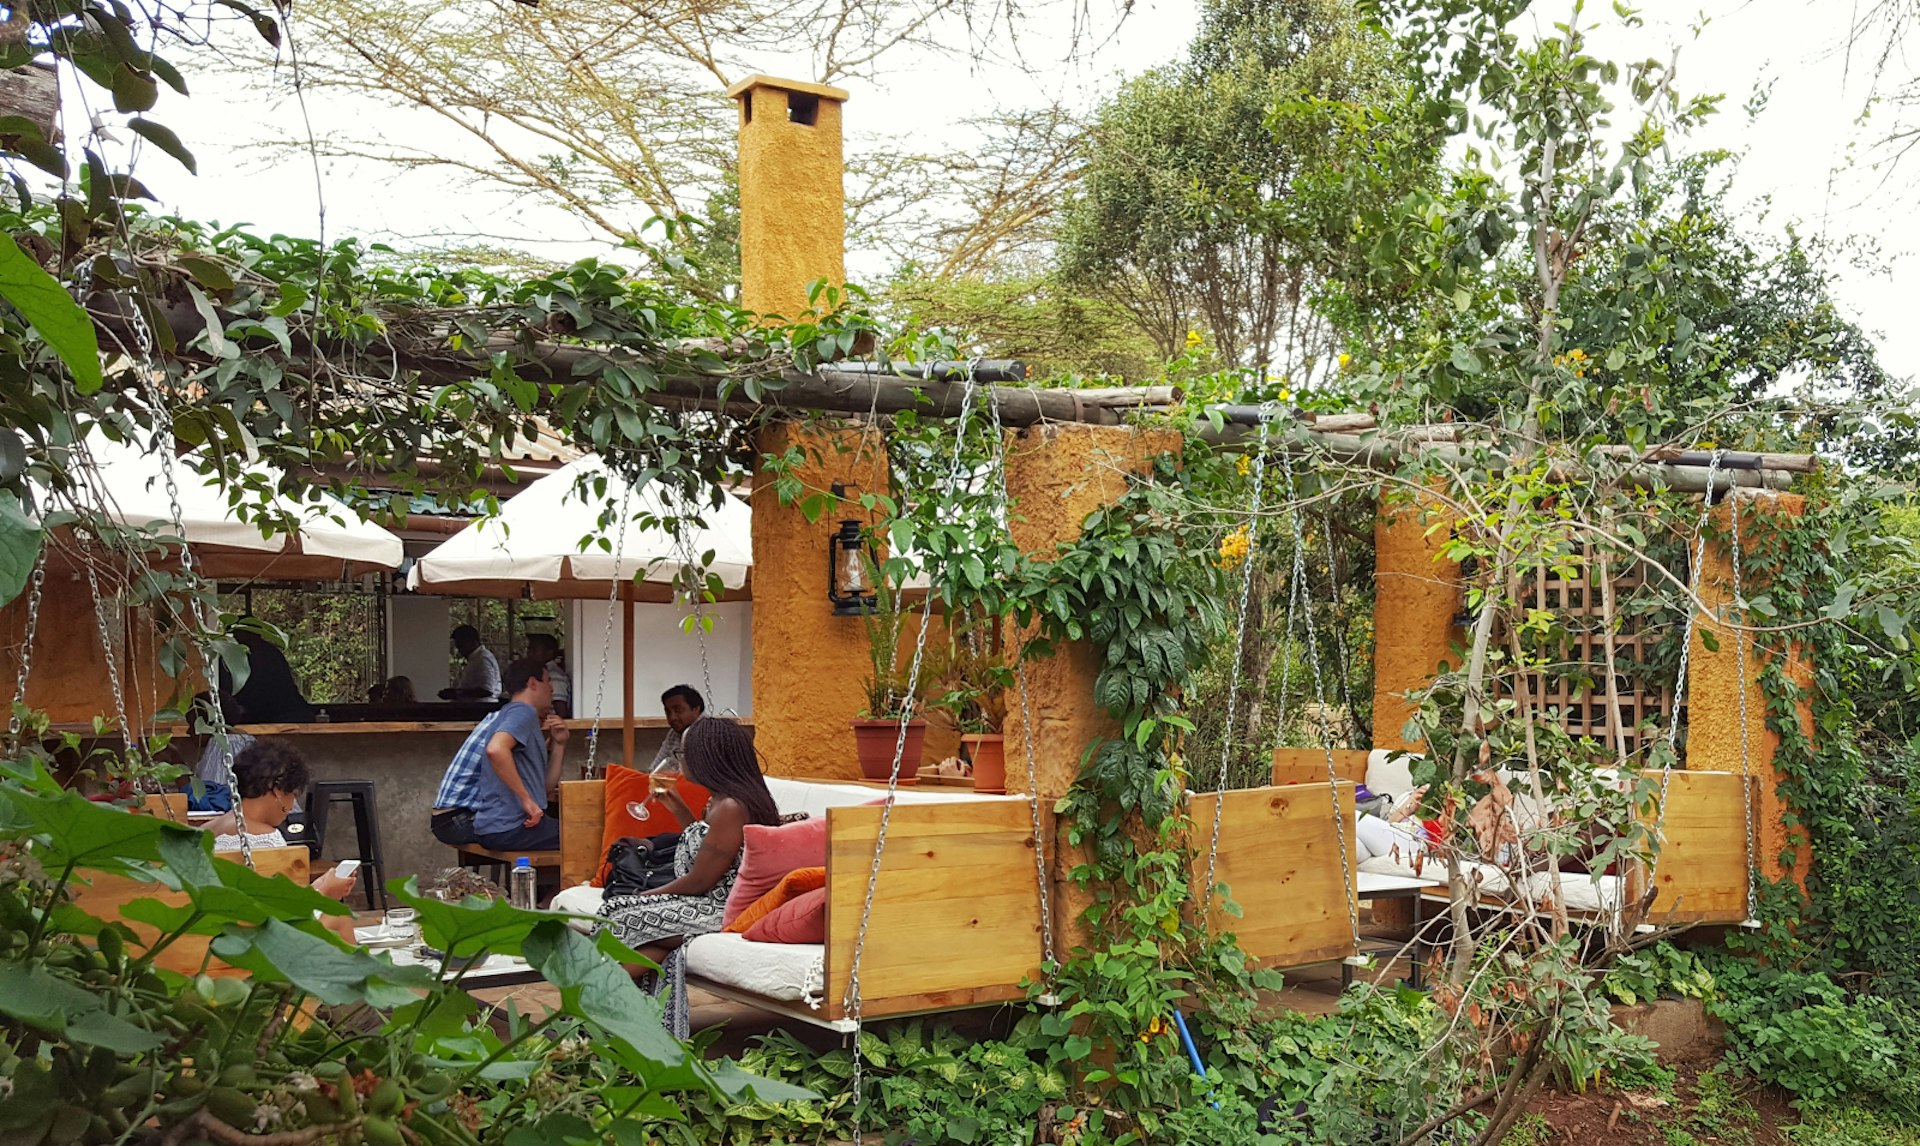 Wooden chairs with large white cushions hang from chains in a very leafy outdoor garden. Patrons relax while sipping coffee © Clementine Logan / Lonely Planet